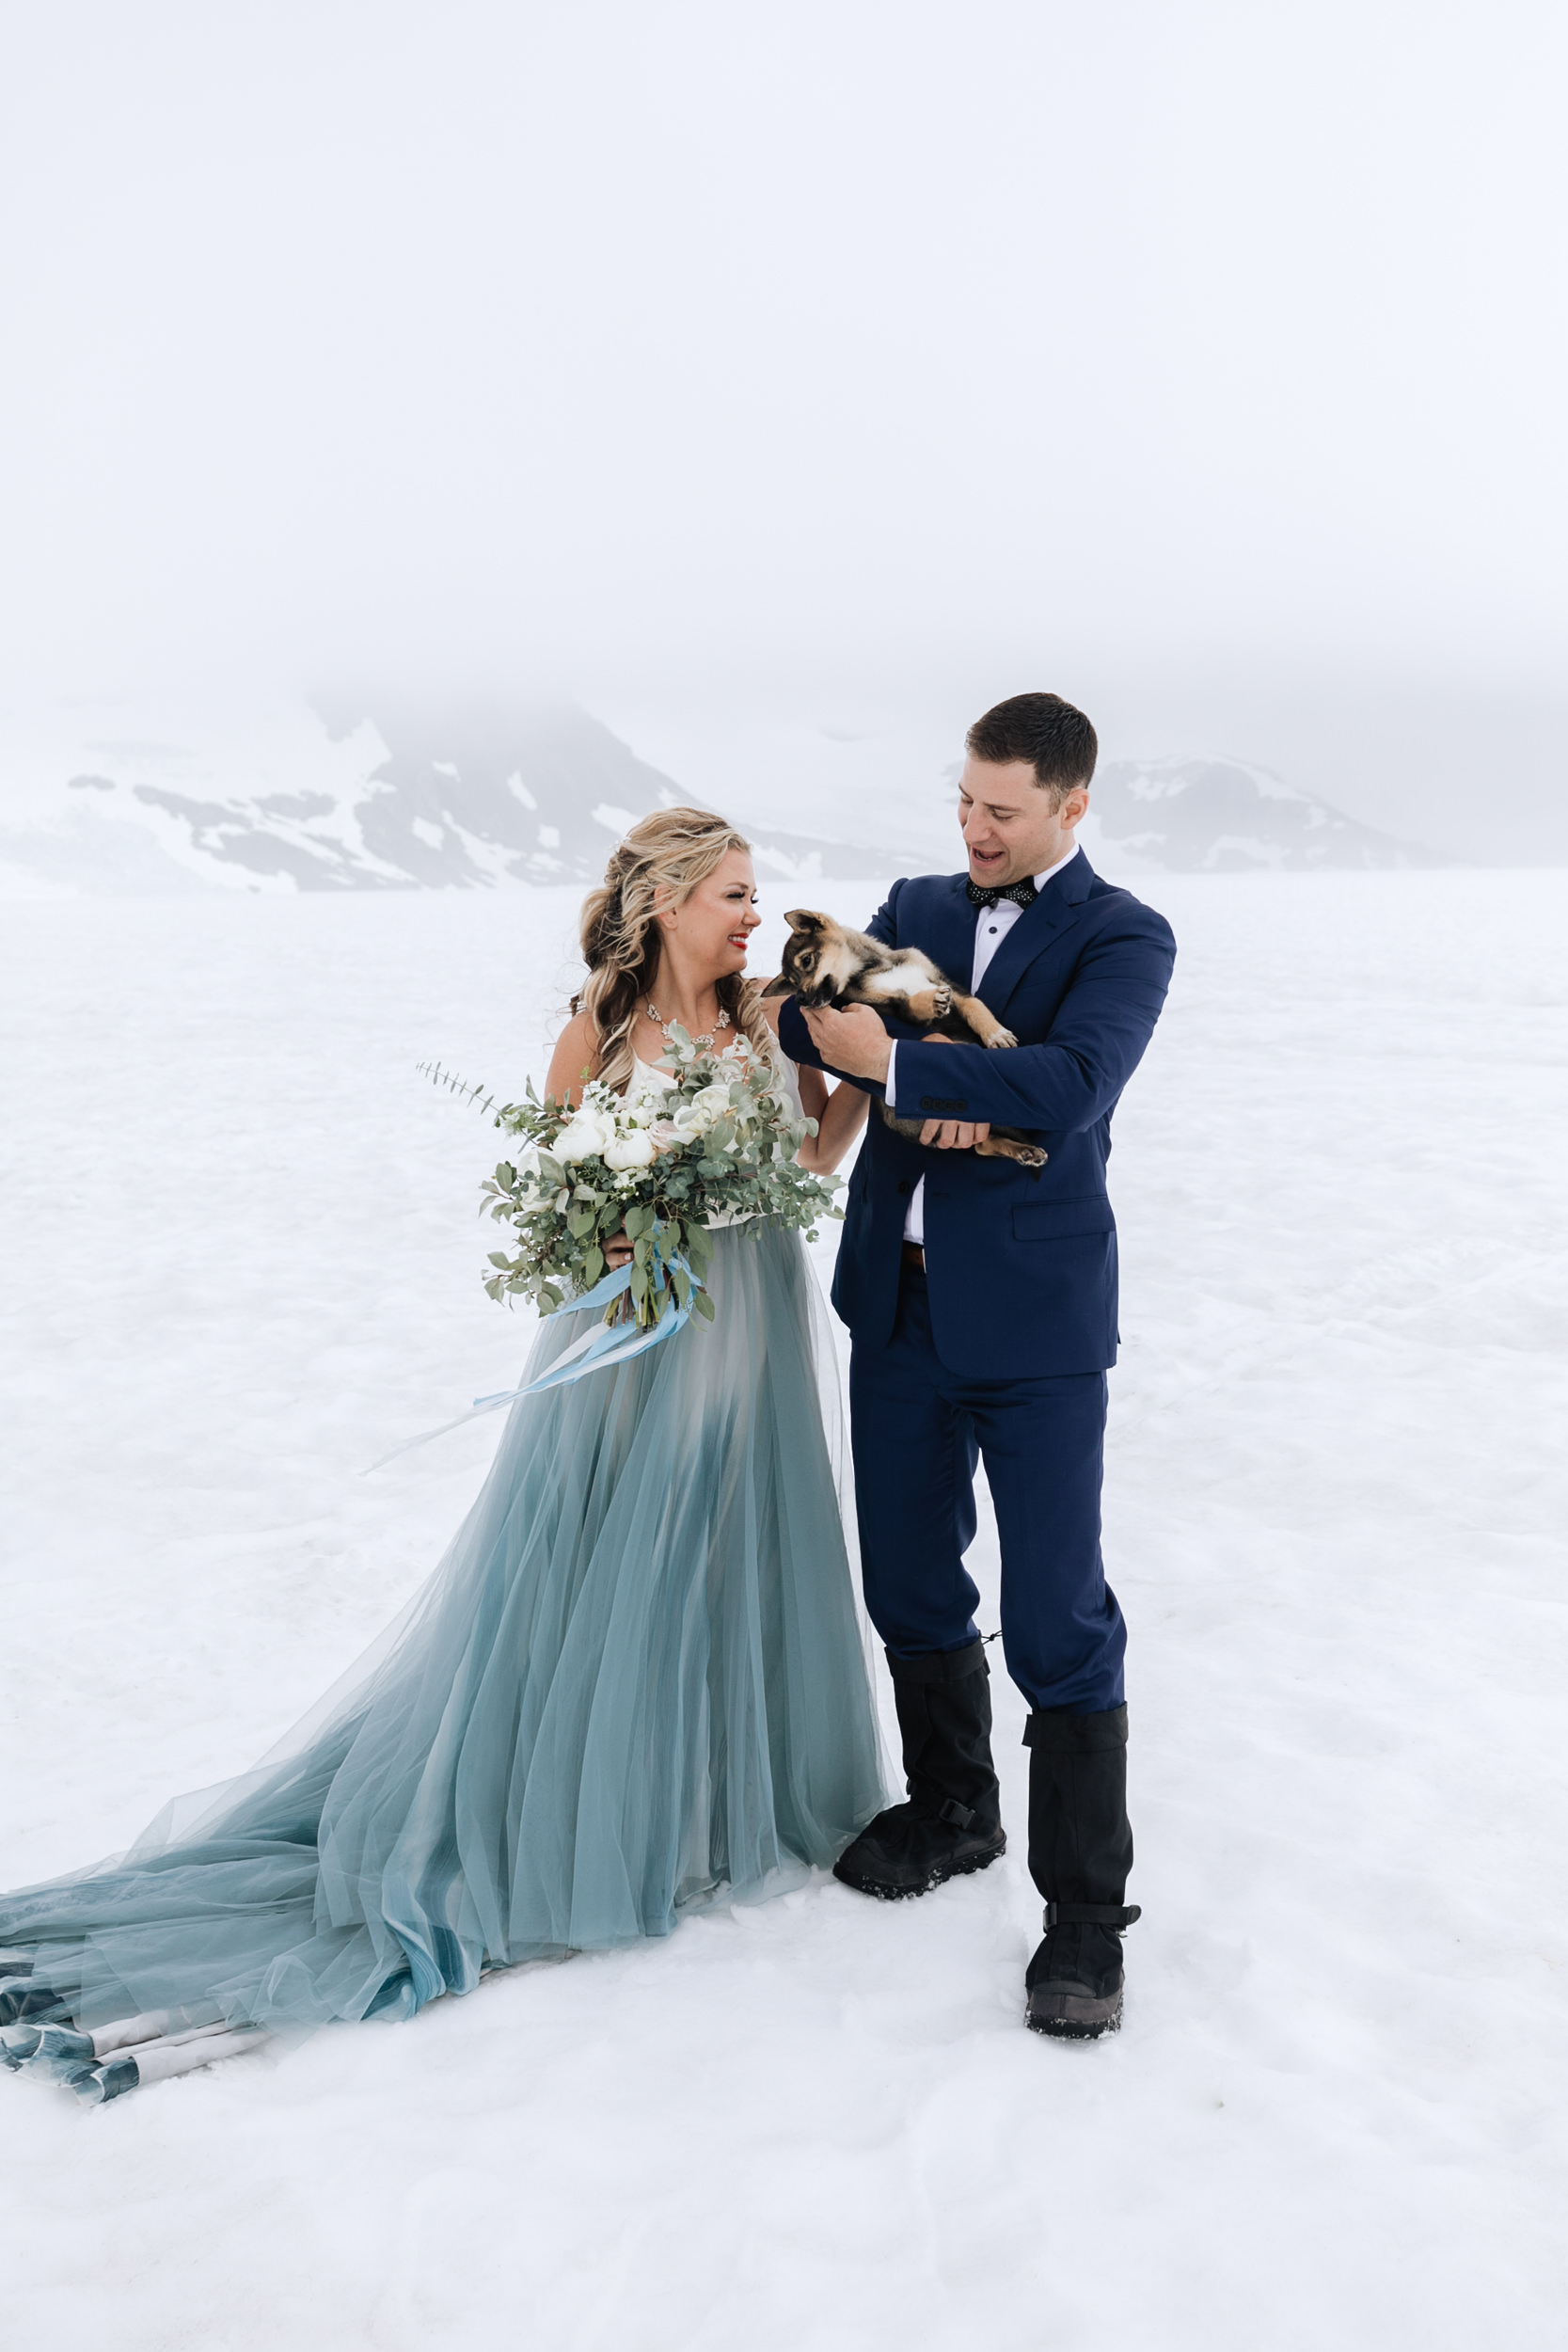 dog sledding in alaska | helicopter tour wedding ideas | the hearnes elopement photography